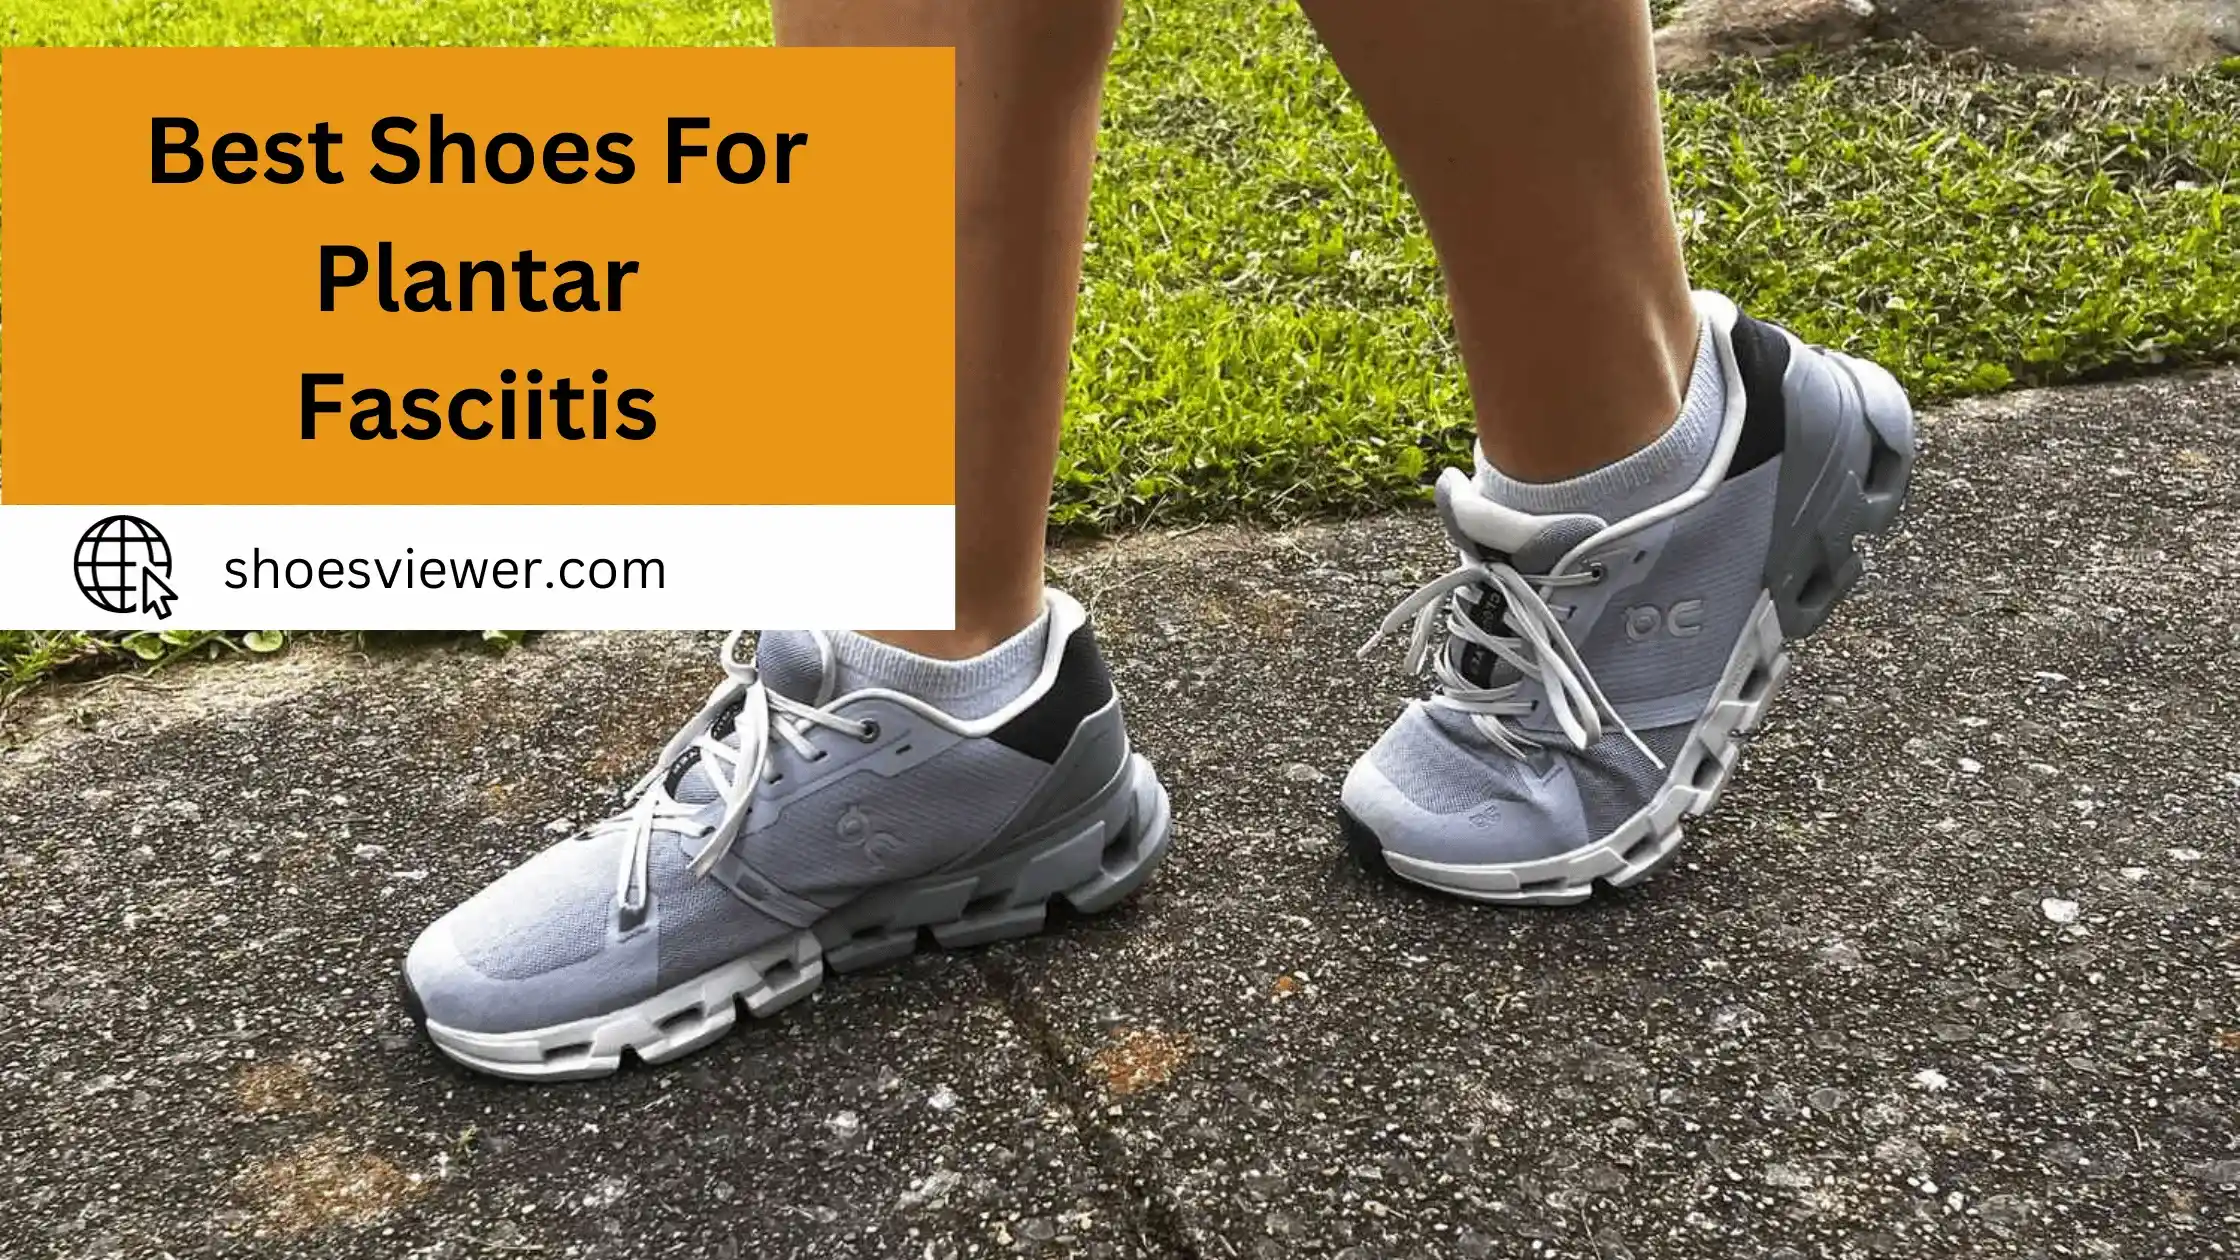 Best Shoes For Plantar Fasciitis - (Complete Reviews)